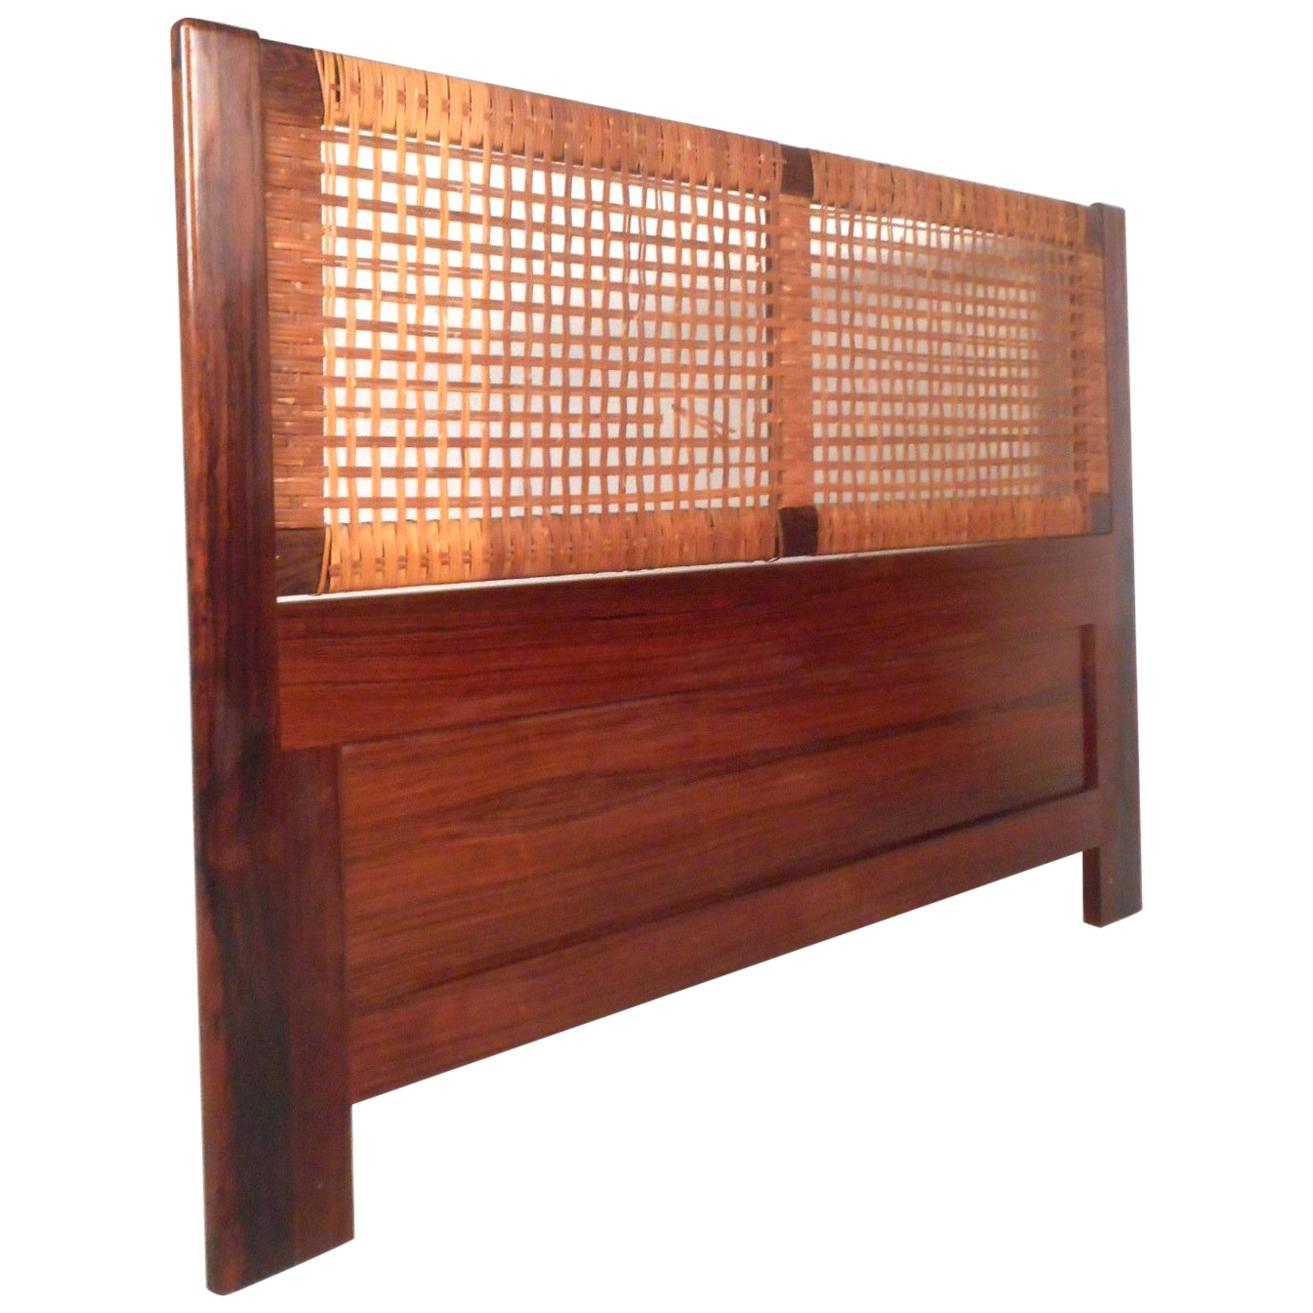 Midcentury Queen Sized Rosewood and Cane Headboard